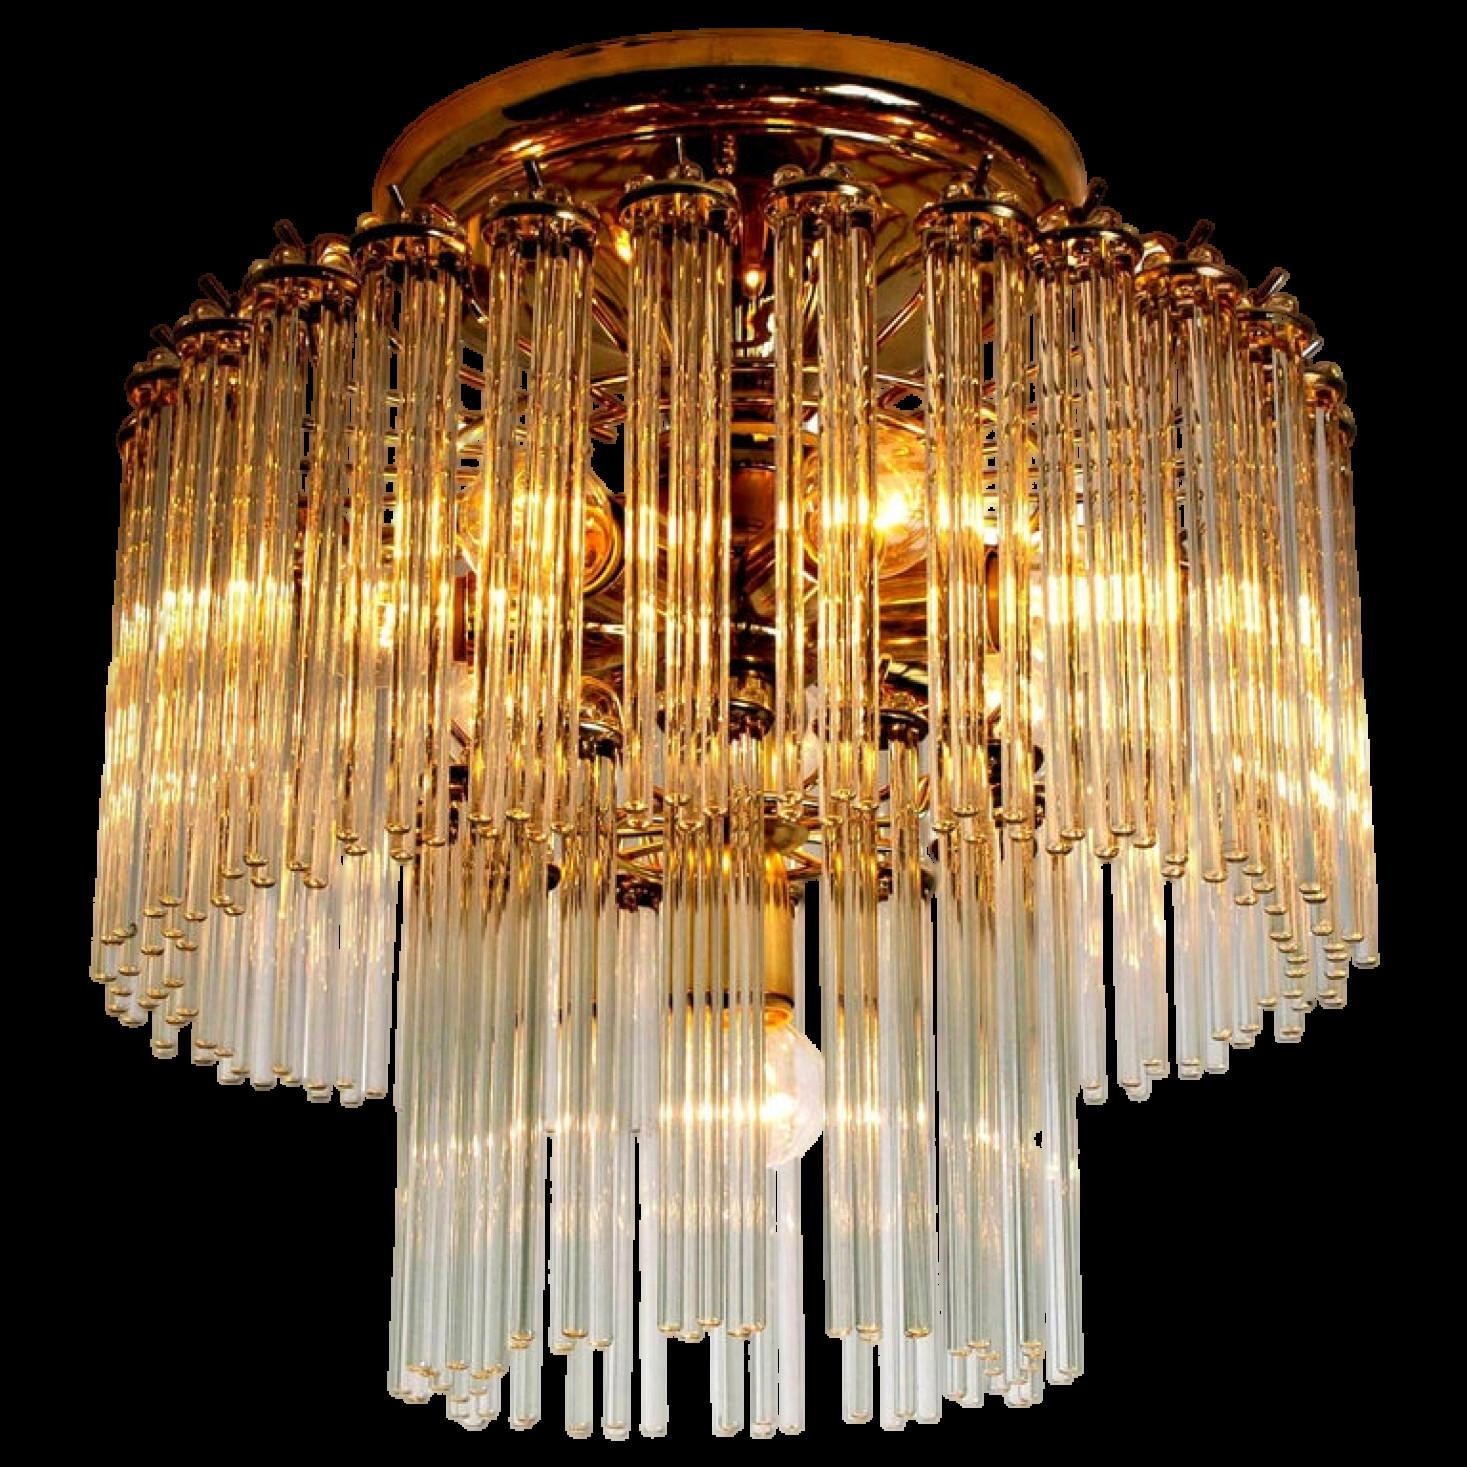 A Italian Mid-Century Modern glass rod and brass Gaetano Sciolari flush mount for Lightolier, circa 1960s-1970s. Illuminates beautifully.
With 48 pierced round form clusters of light catching optical quality glass rods (7.1 inch) sitting on a brass